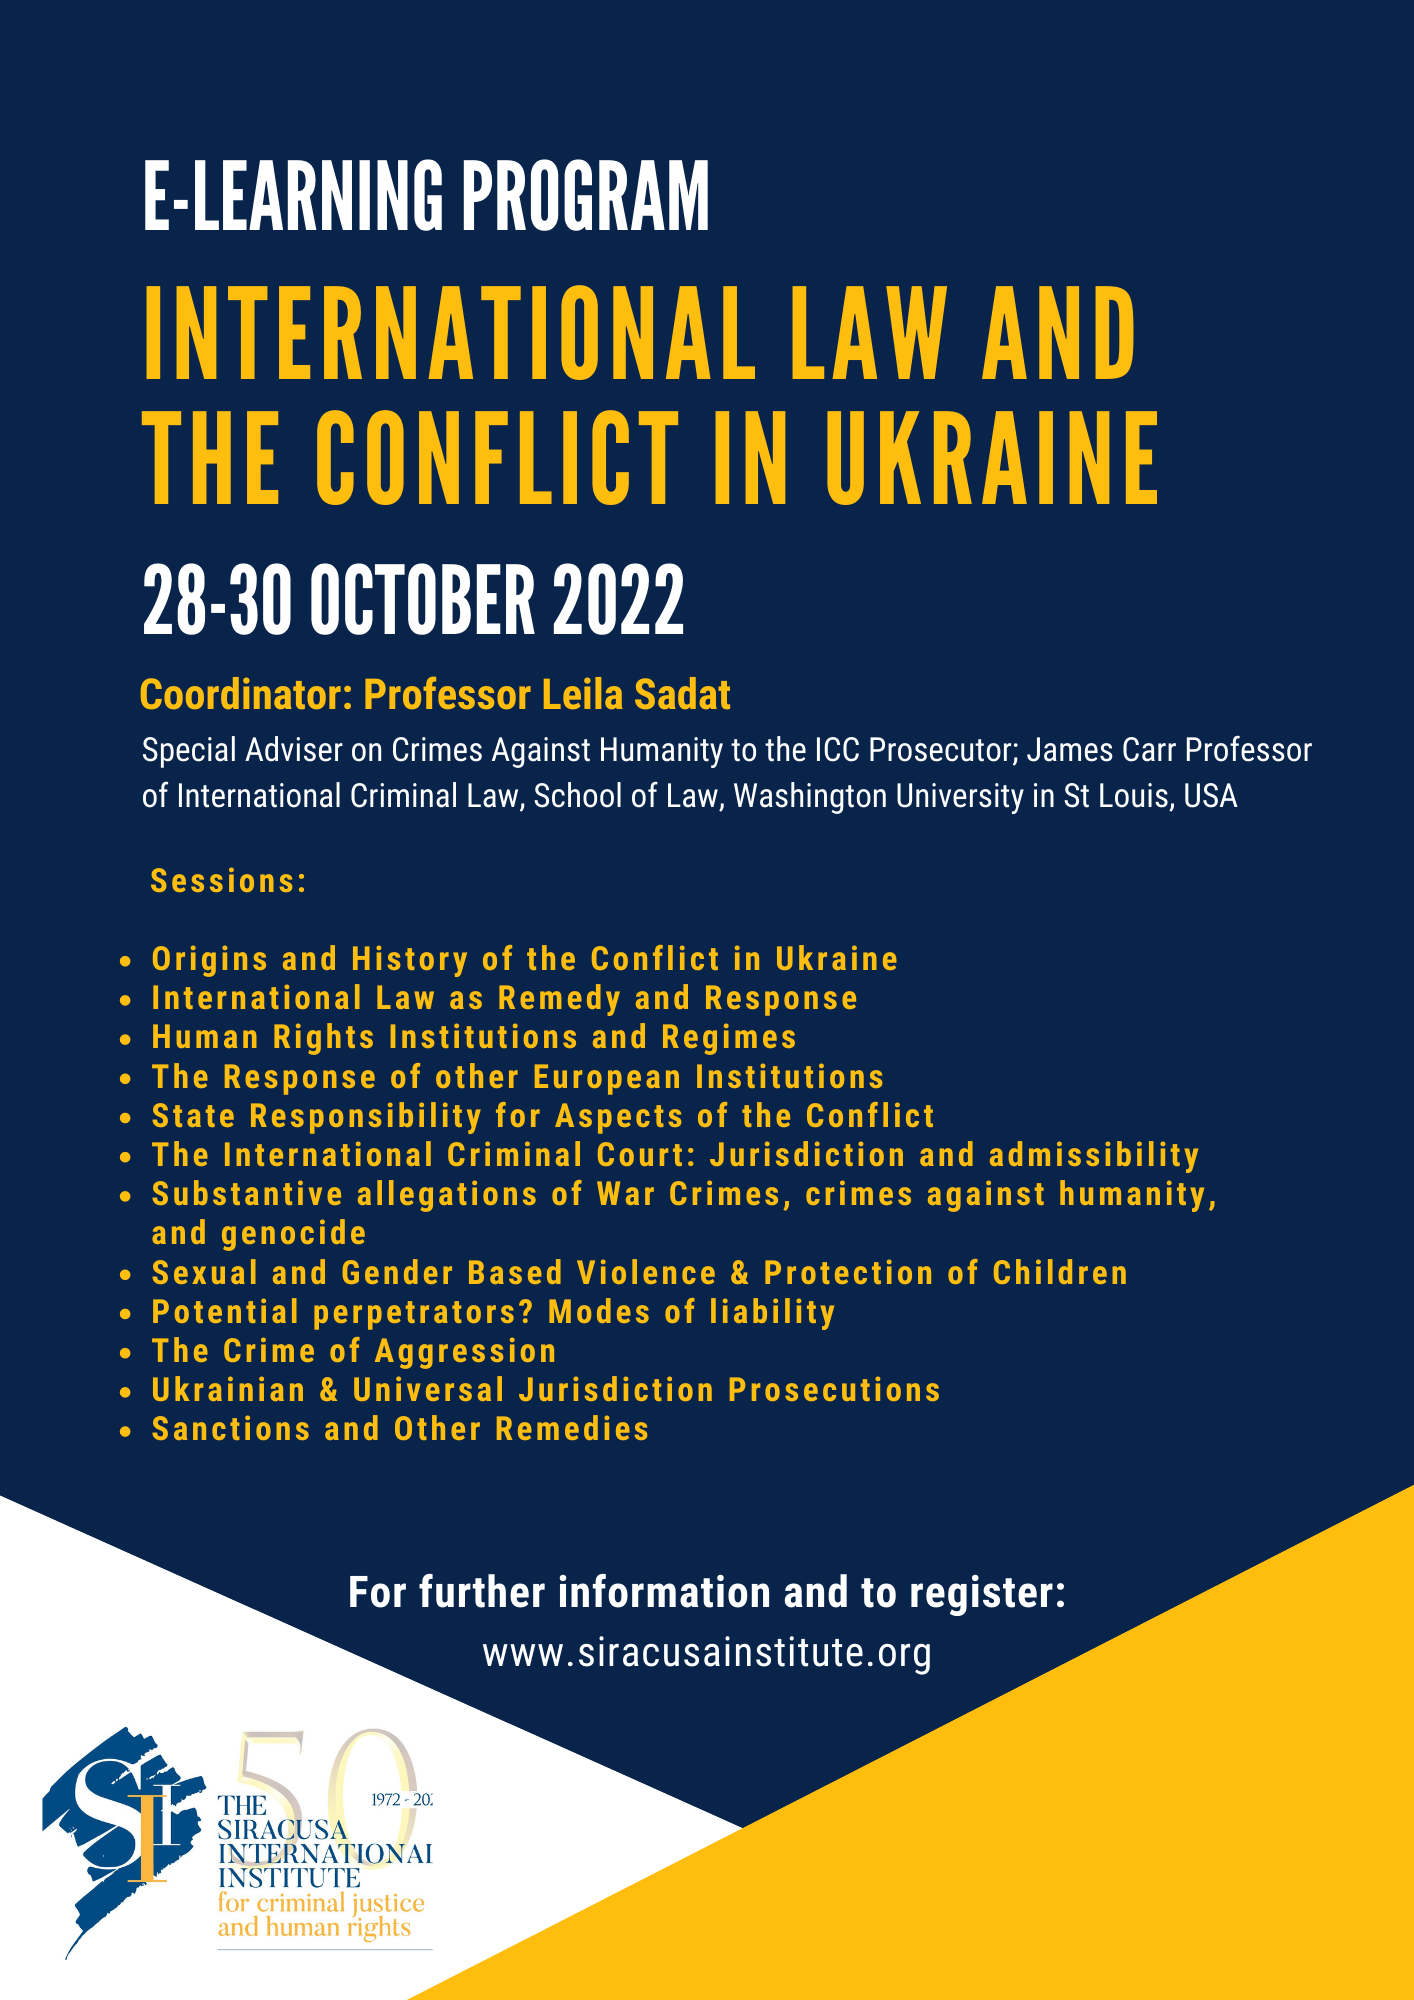 E-Learning Programme: International Law and the Conflict in Ukraine